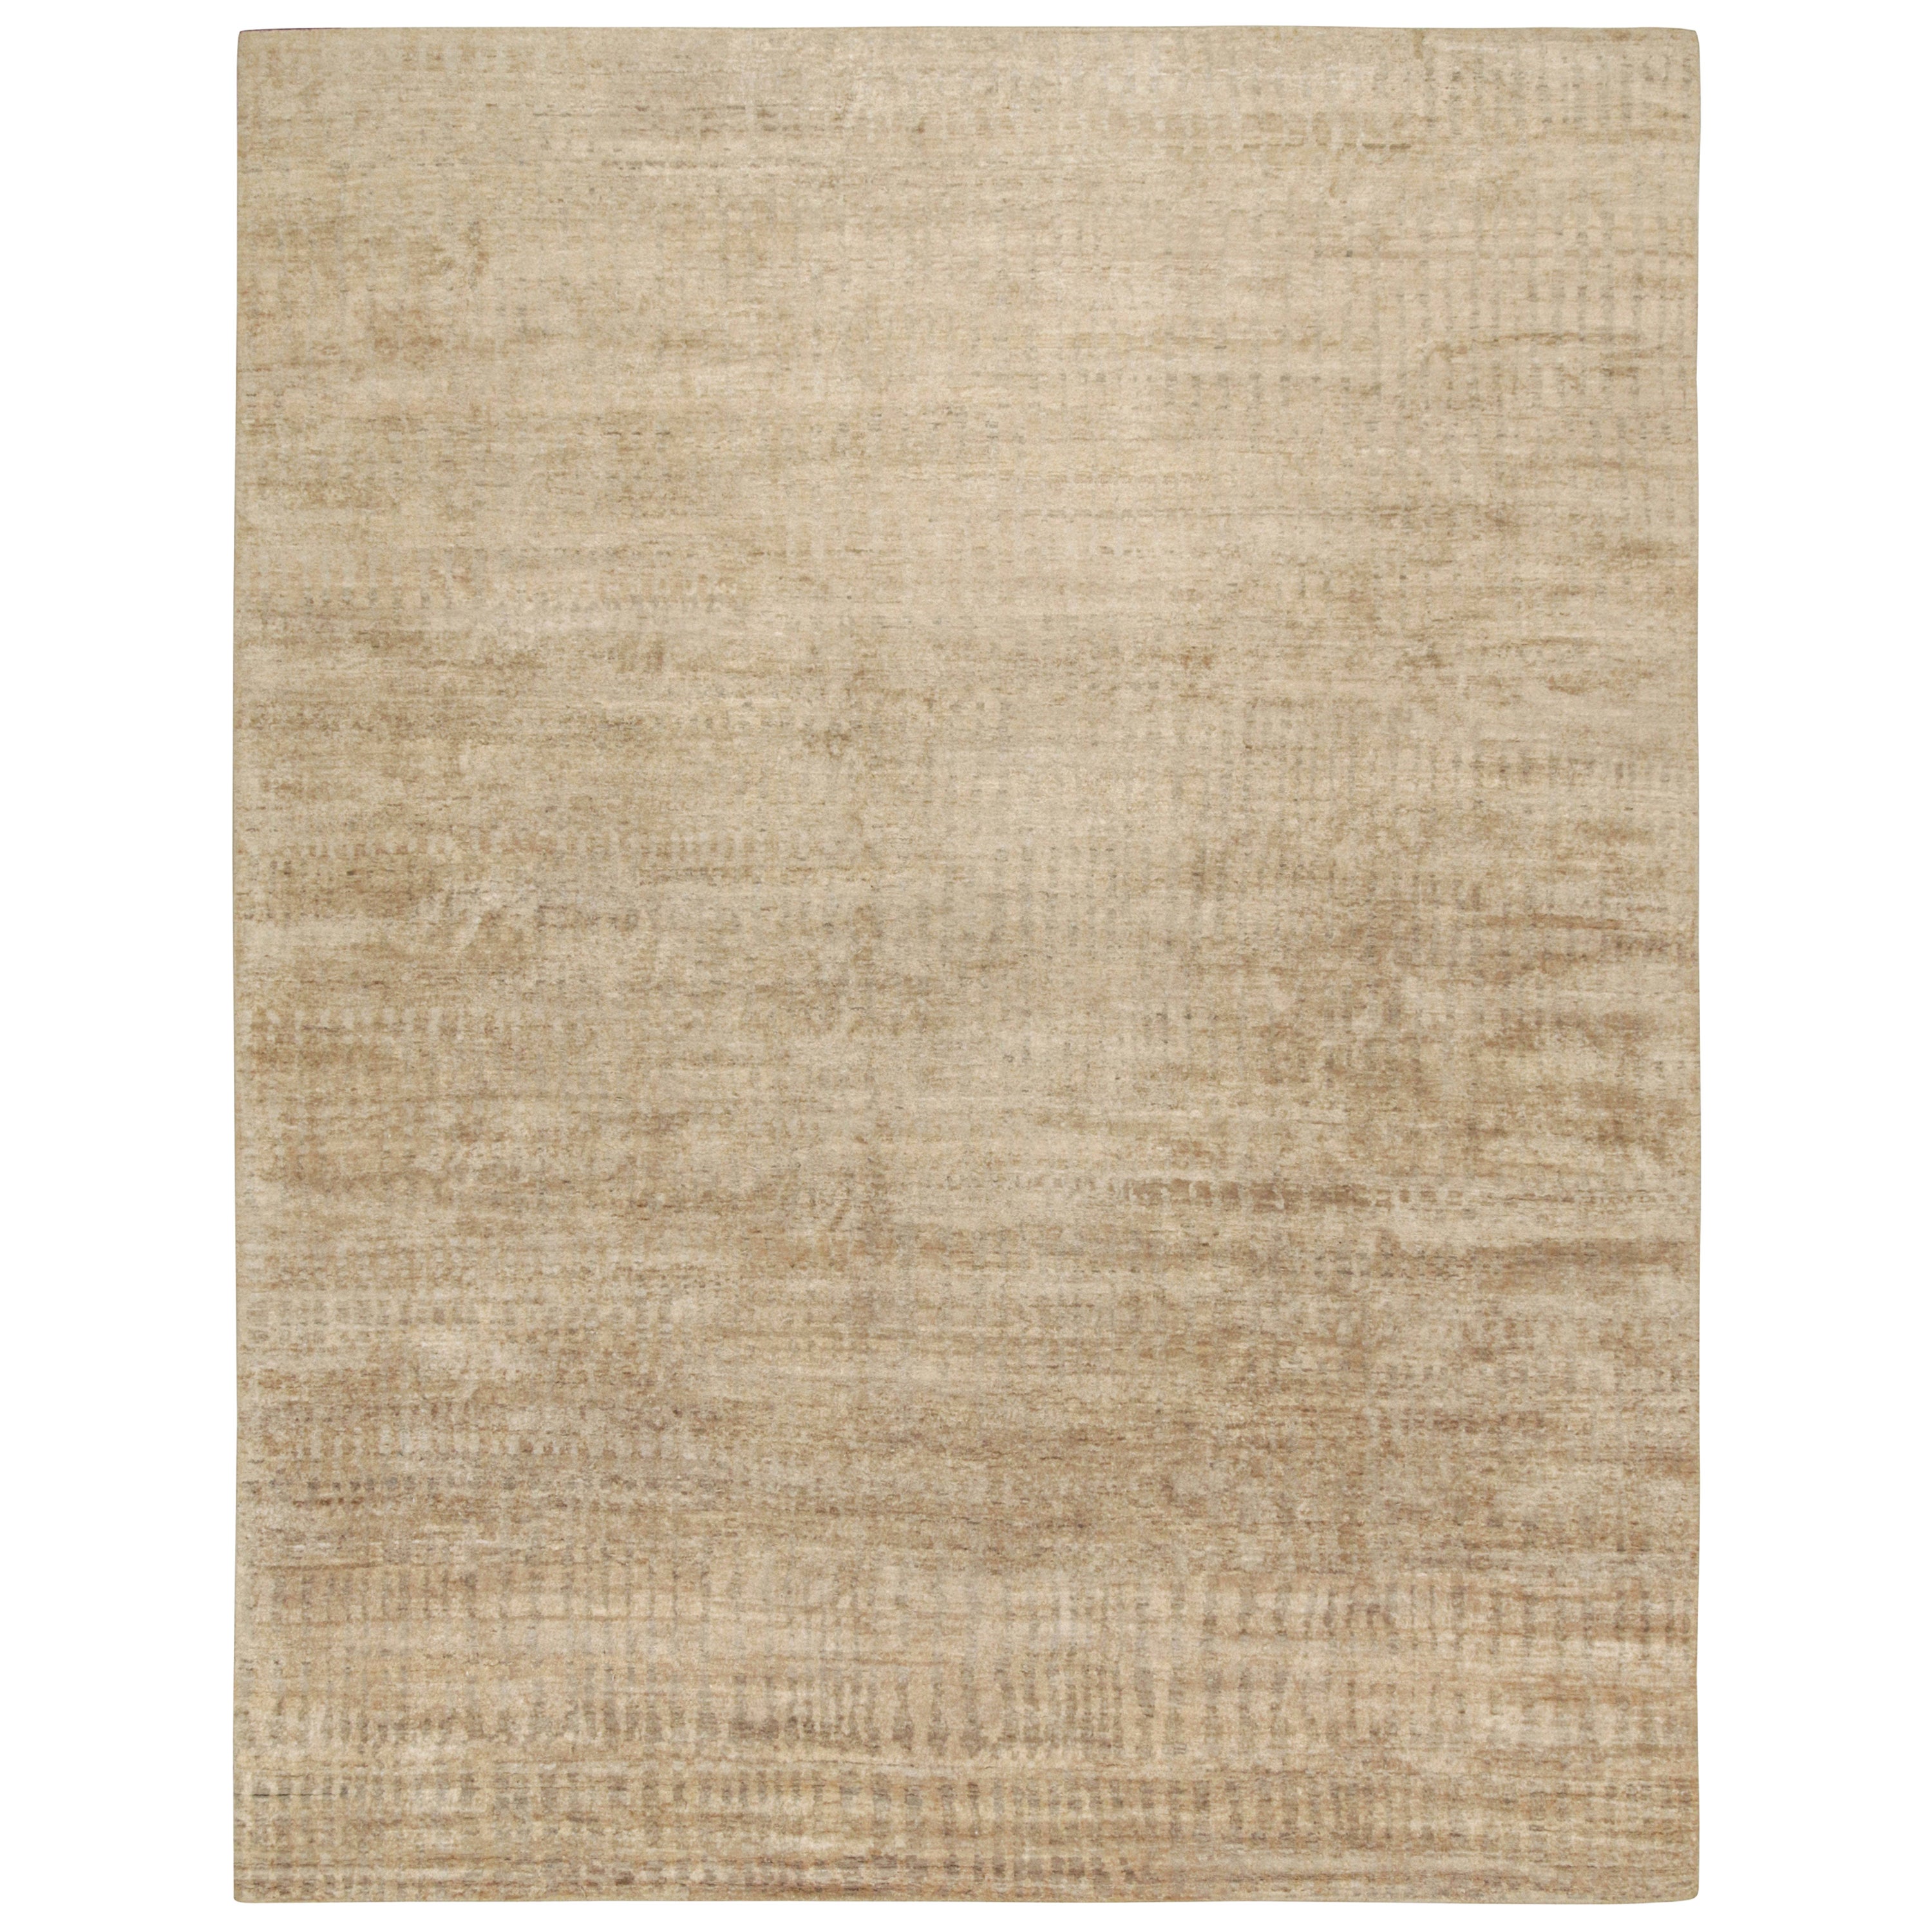 This contemporary 12x15 rug is a new addition to Rug & Kilim’s Texture of Color Collection. Hand-knotted in silk, its design explores a bold take on plain rugs with a minimalist design in neutral tones.

This rug can be cut and resized to multiple